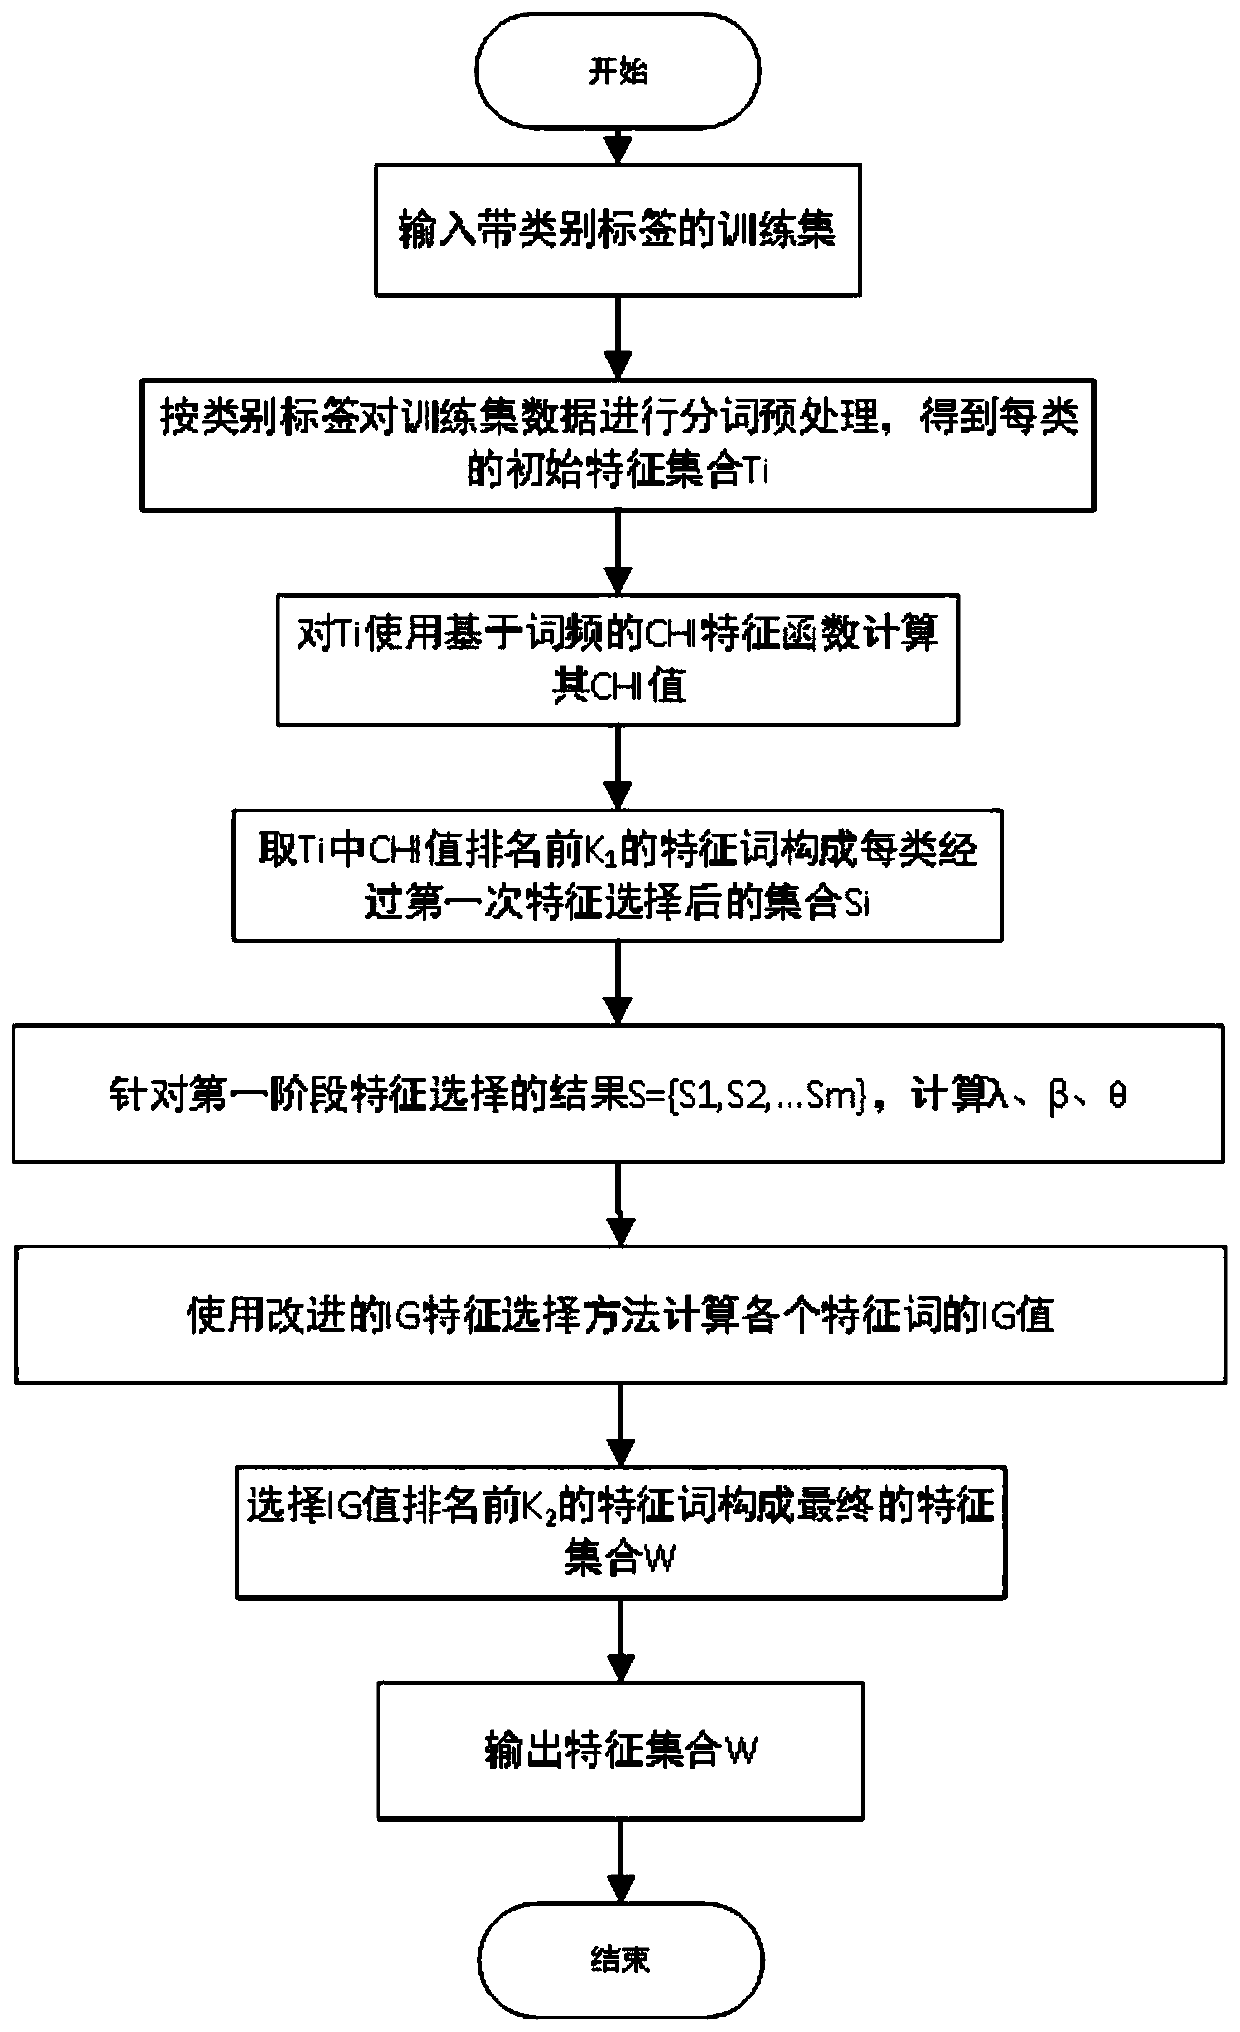 Two-stage text feature selection method under unbalanced data set